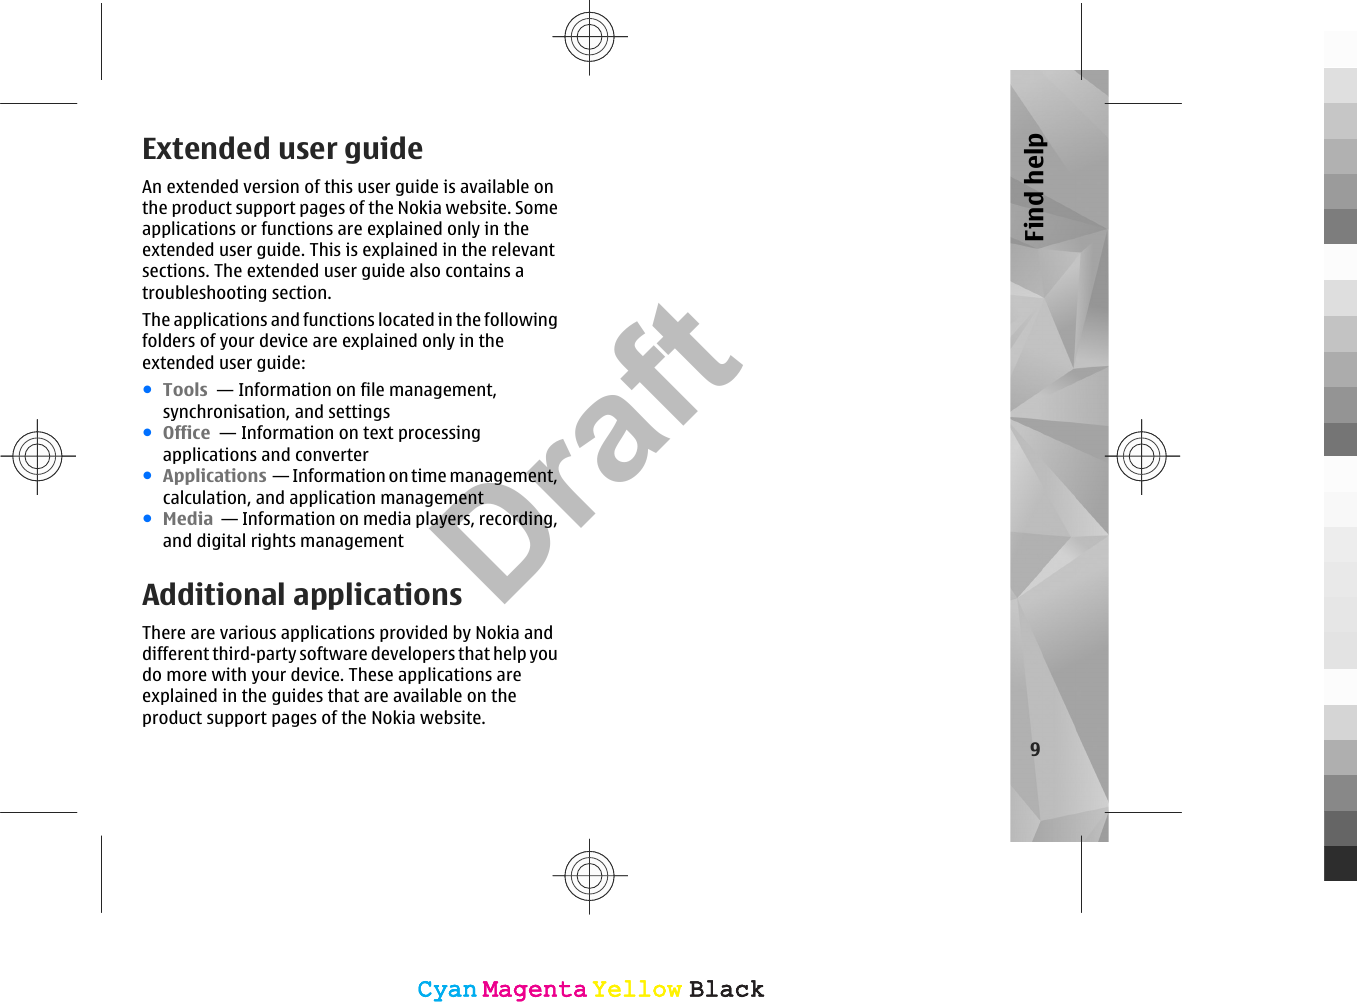 Extended user guideAn extended version of this user guide is available onthe product support pages of the Nokia website. Someapplications or functions are explained only in theextended user guide. This is explained in the relevantsections. The extended user guide also contains atroubleshooting section.The applications and functions located in the followingfolders of your device are explained only in theextended user guide:●Tools  — Information on file management,synchronisation, and settings●Office  — Information on text processingapplications and converter●Applications  — Information on time management,calculation, and application management●Media  — Information on media players, recording,and digital rights managementAdditional applicationsThere are various applications provided by Nokia anddifferent third-party software developers that help youdo more with your device. These applications areexplained in the guides that are available on theproduct support pages of the Nokia website.9Find helpCyanCyanMagentaMagentaYellowYellowBlackBlackCyanCyanMagentaMagentaYellowYellowBlackBlackDraft